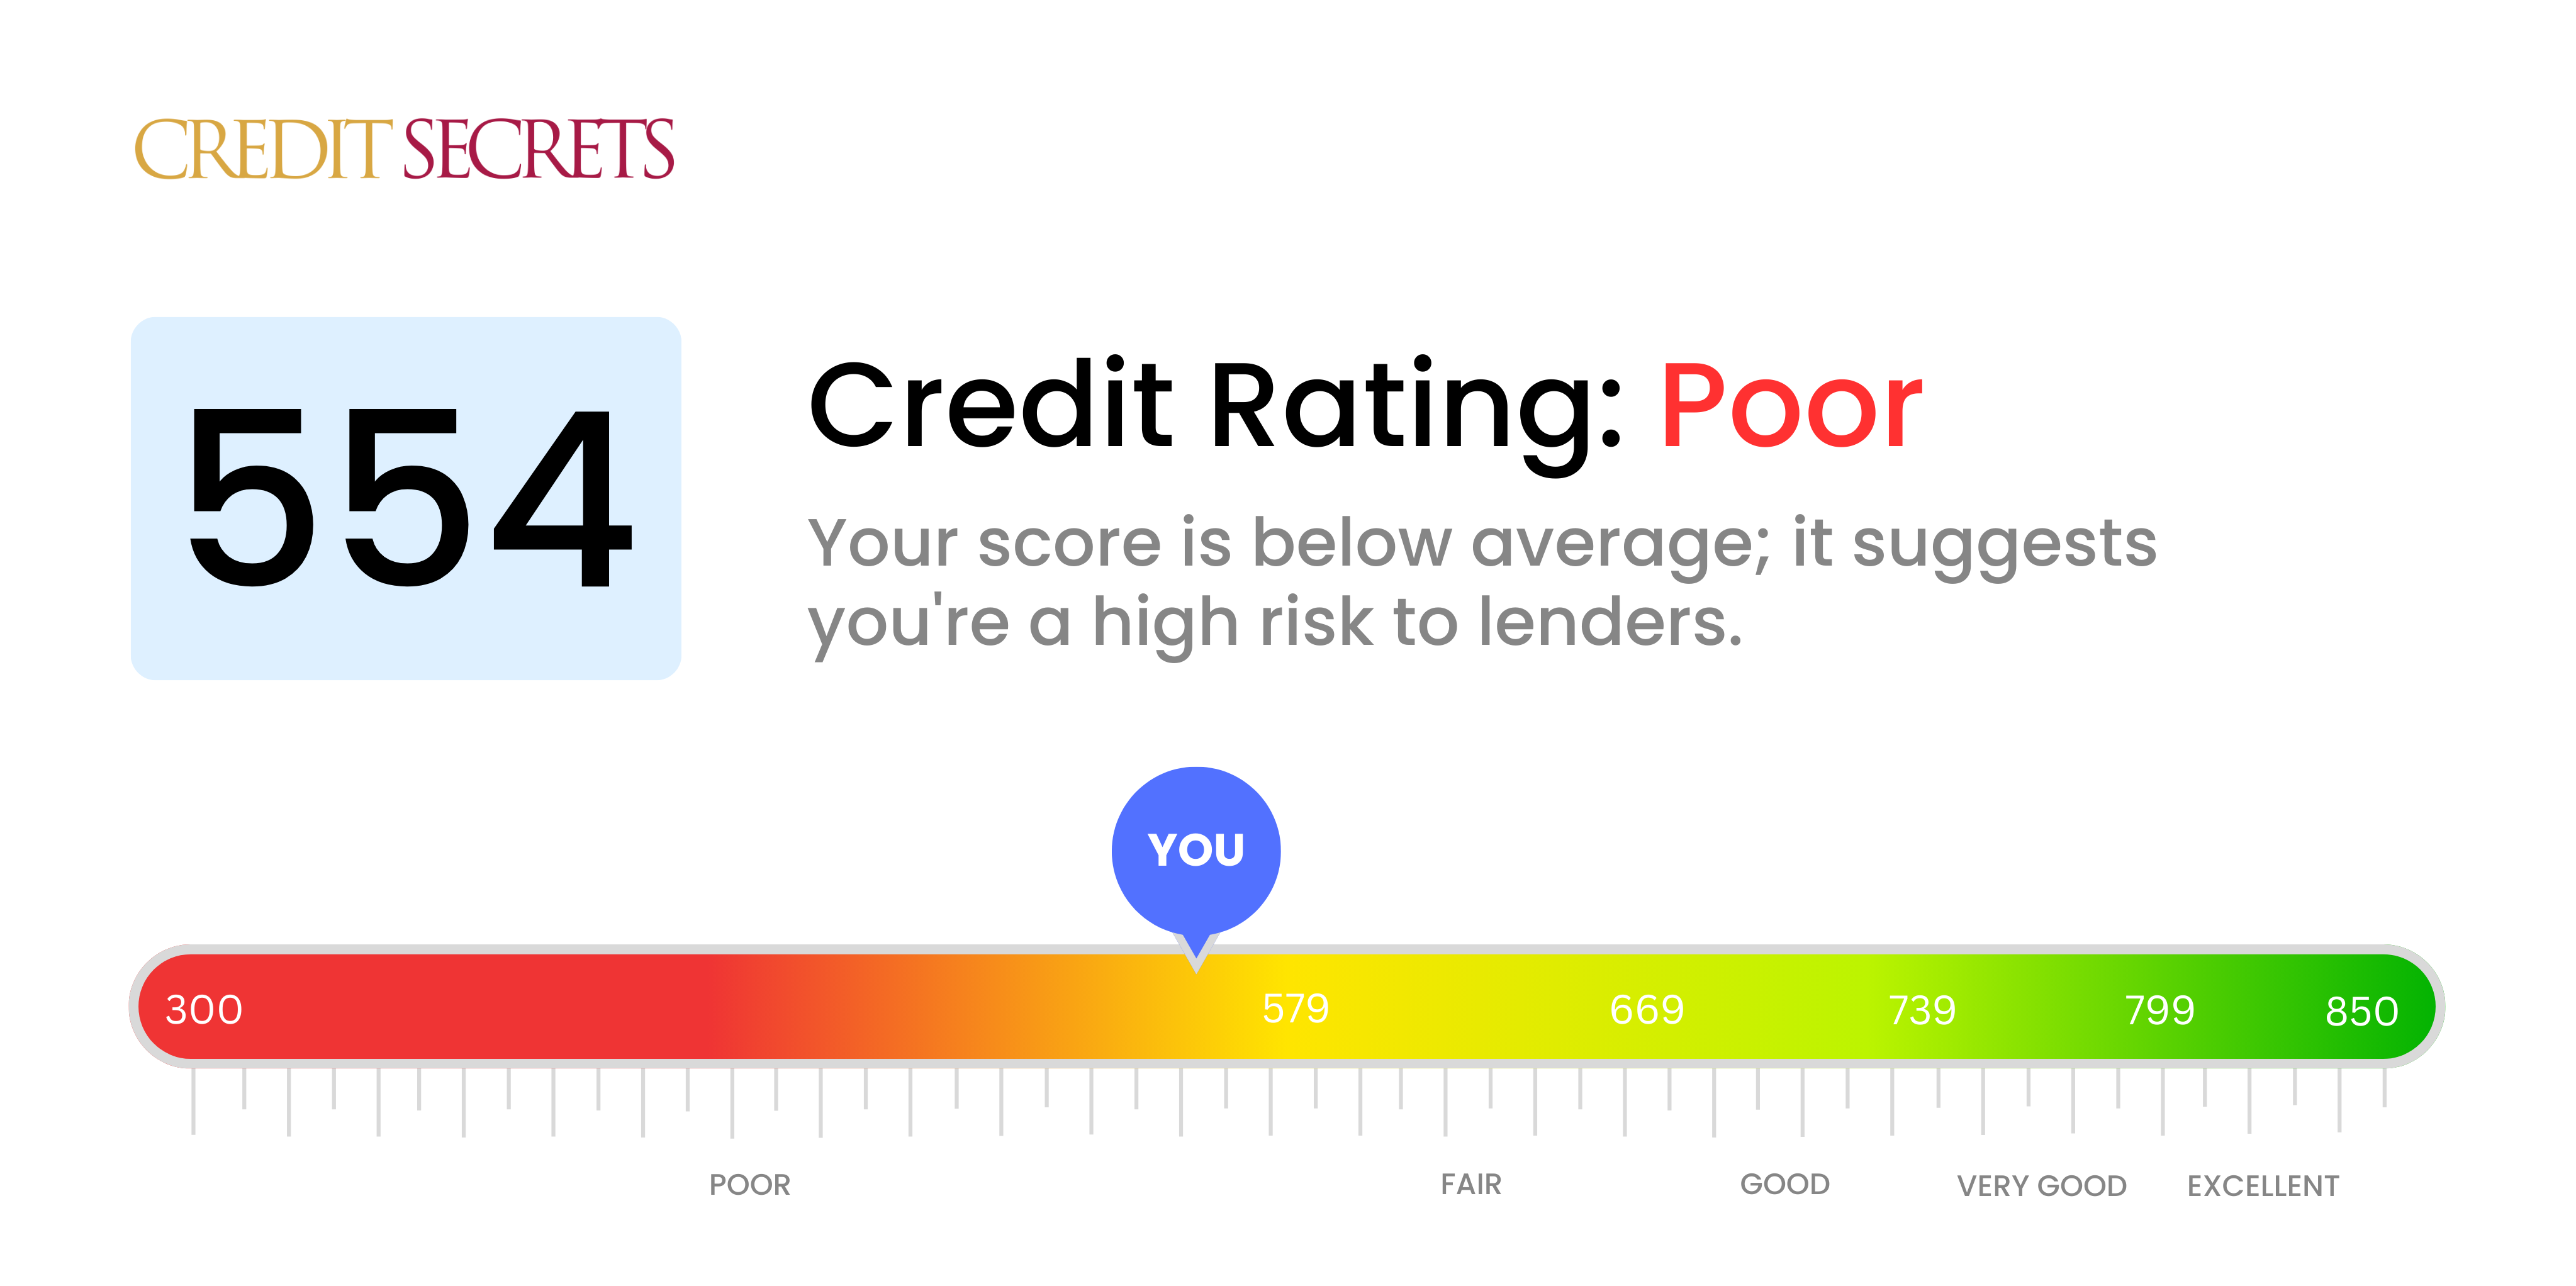 Is 554 a good credit score?